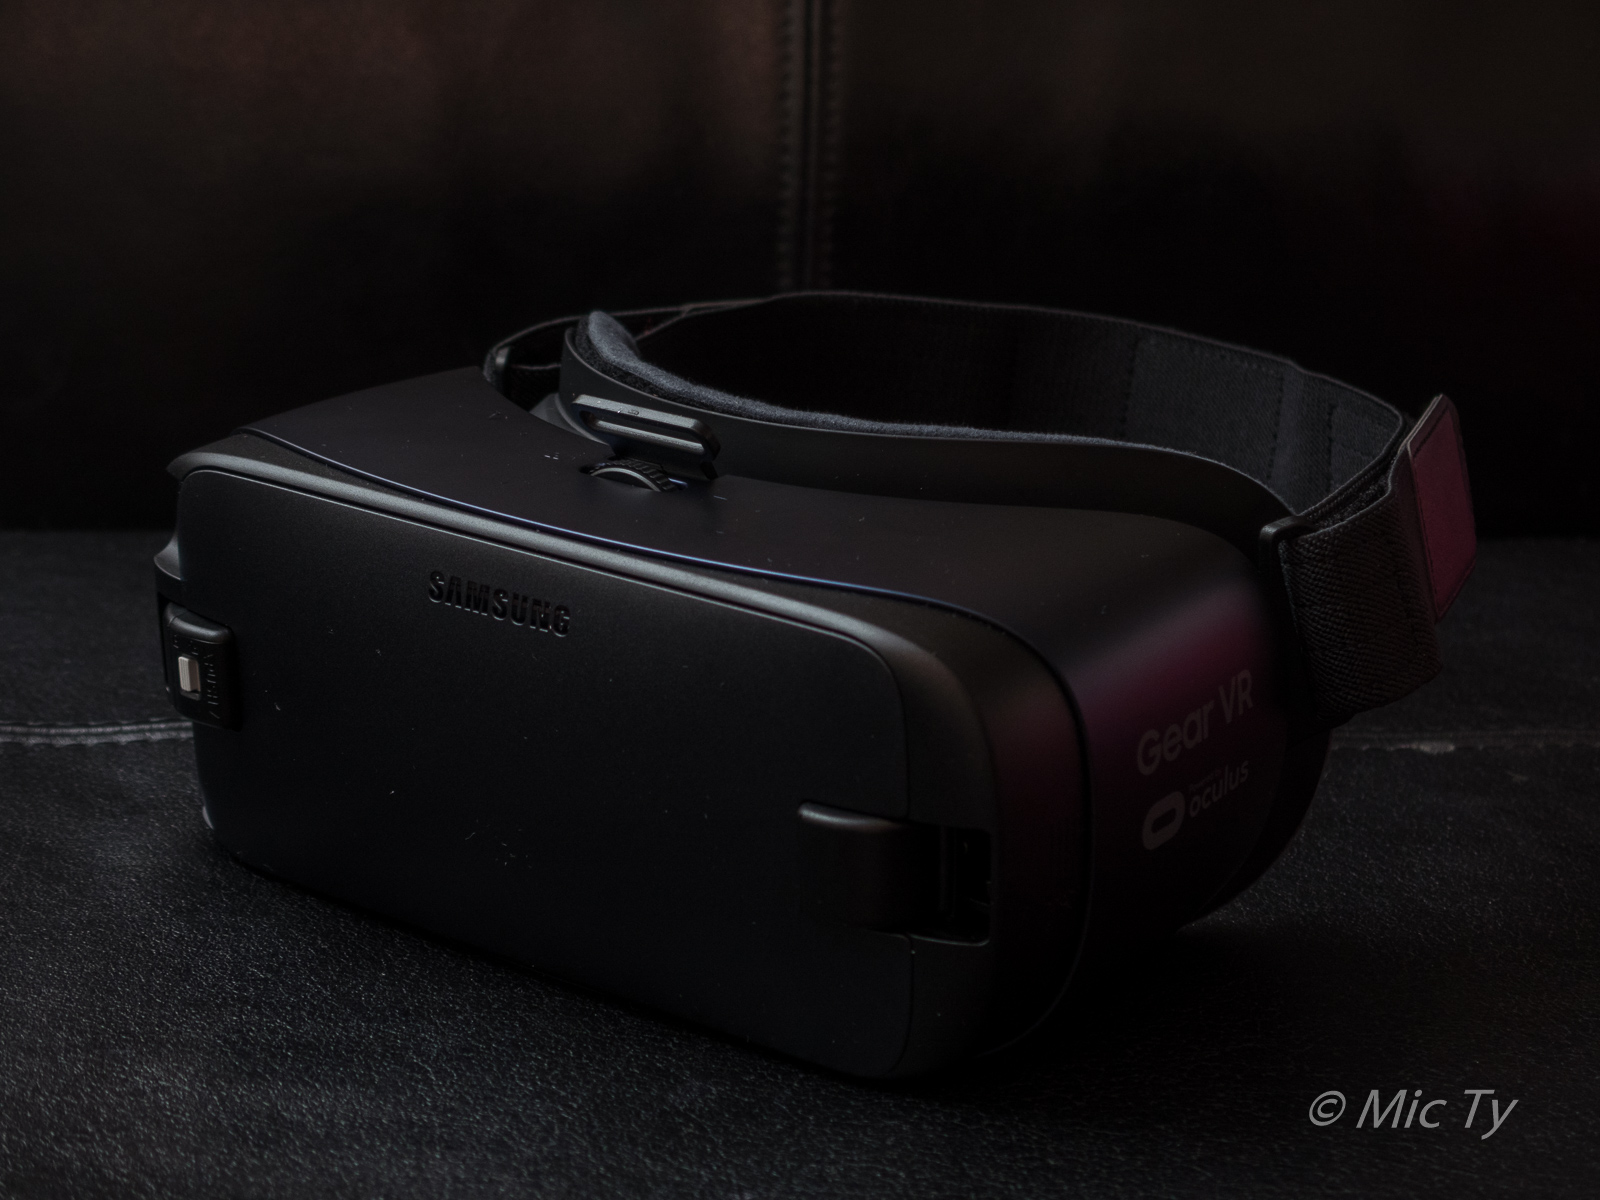 REVIEW: Samsung Gear VR 2016 - the best version of the Gear VR to date ...